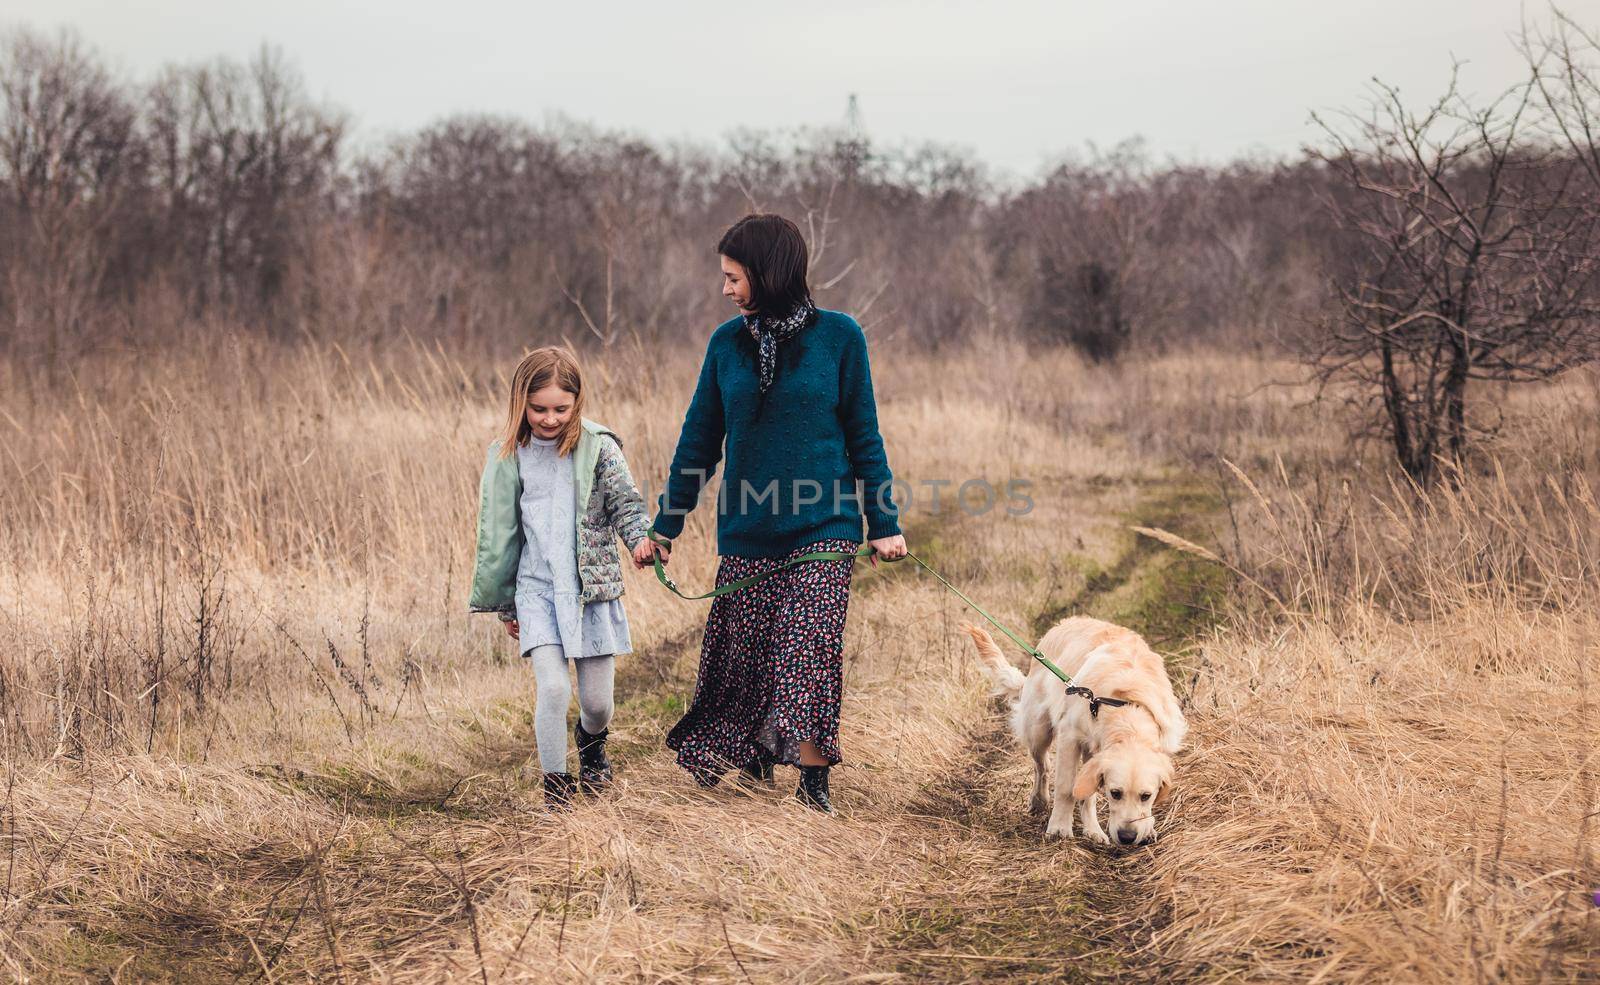 Walk with dog in nature by tan4ikk1